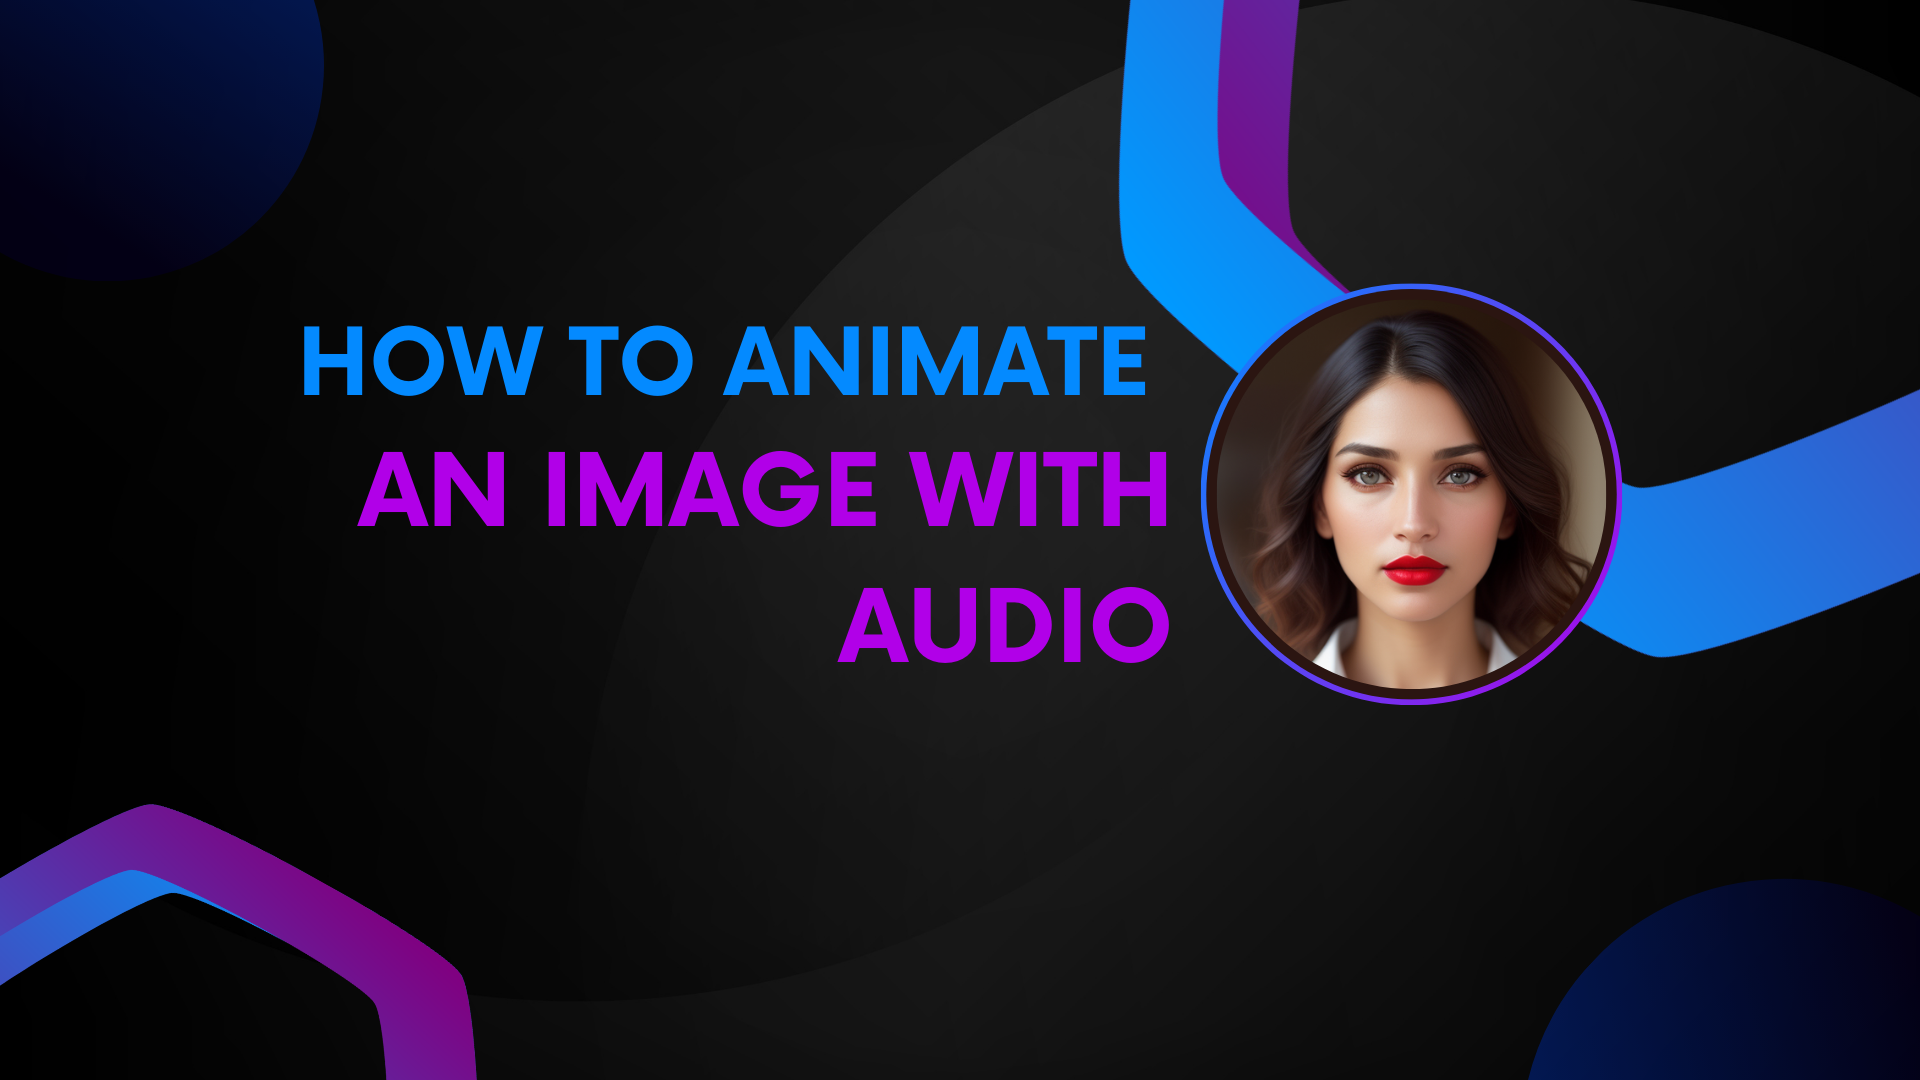 How to Animate an Image with Audio